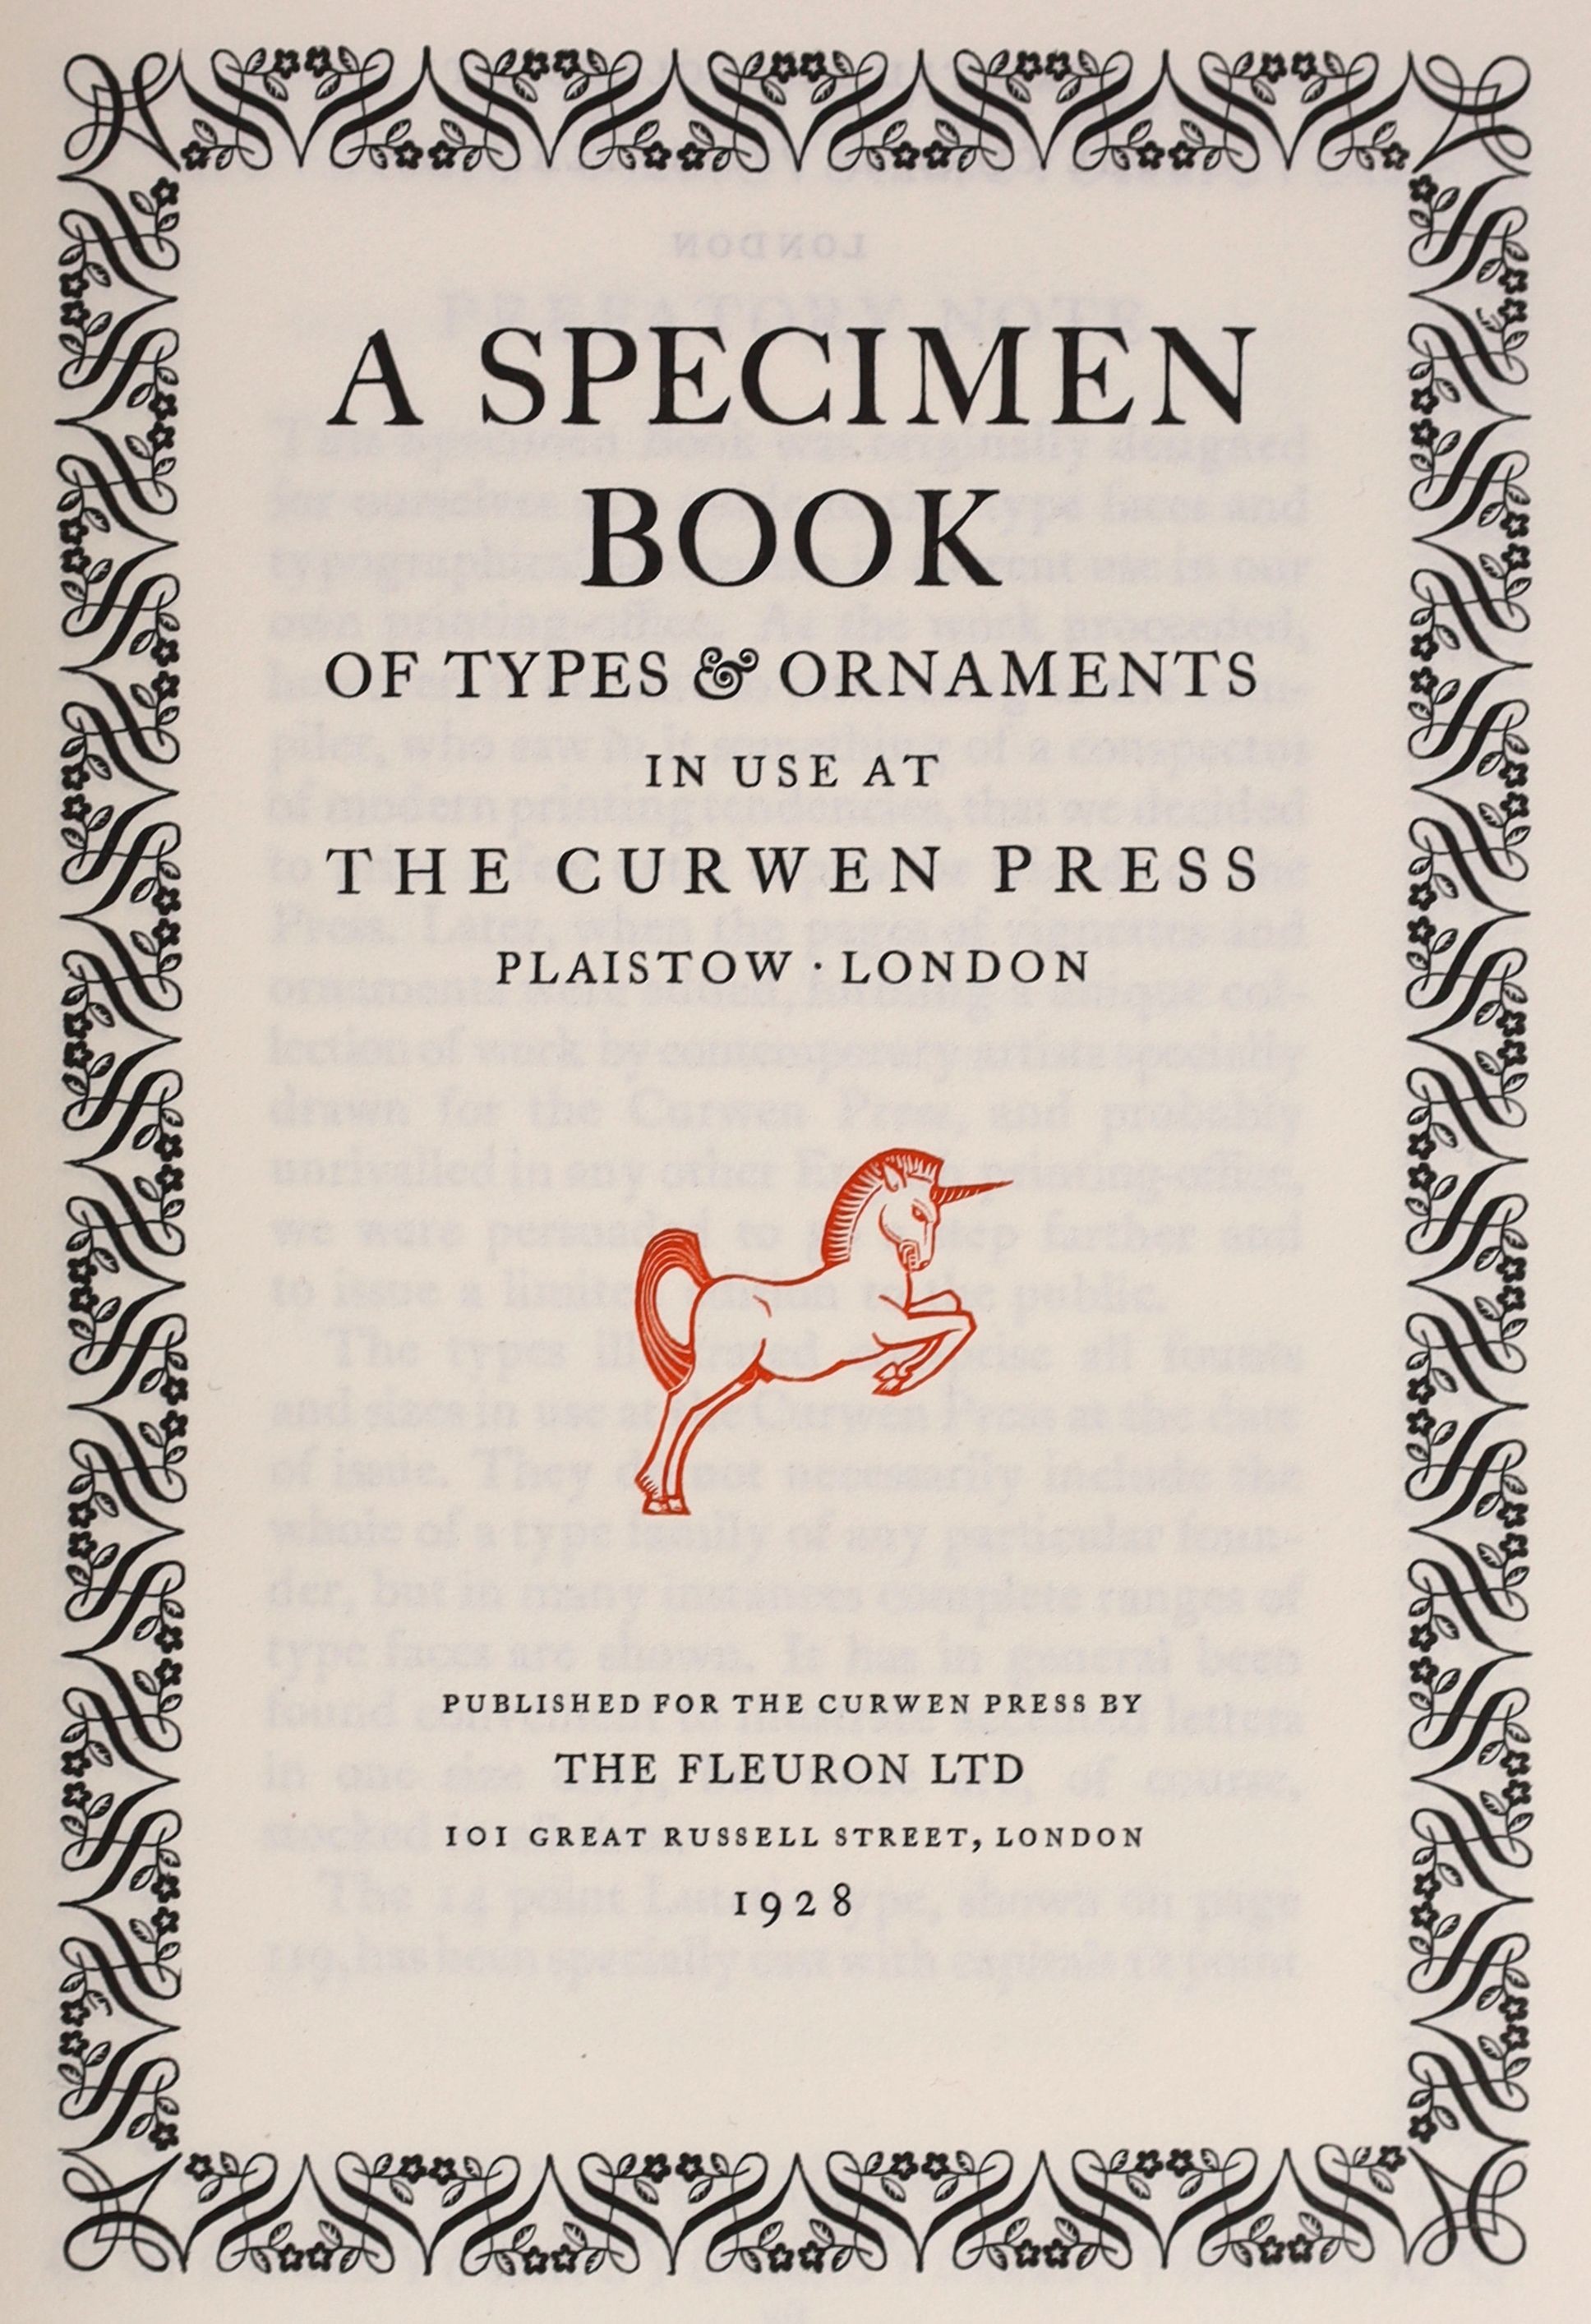 The Curwen Press - A Specimen Book of Types & Ornaments. 1st and limited ed. one of 135. Adorned with illustrated plates on type faces and numerous vignettes, many in colour. Morocco with panelled spine and gilt letters